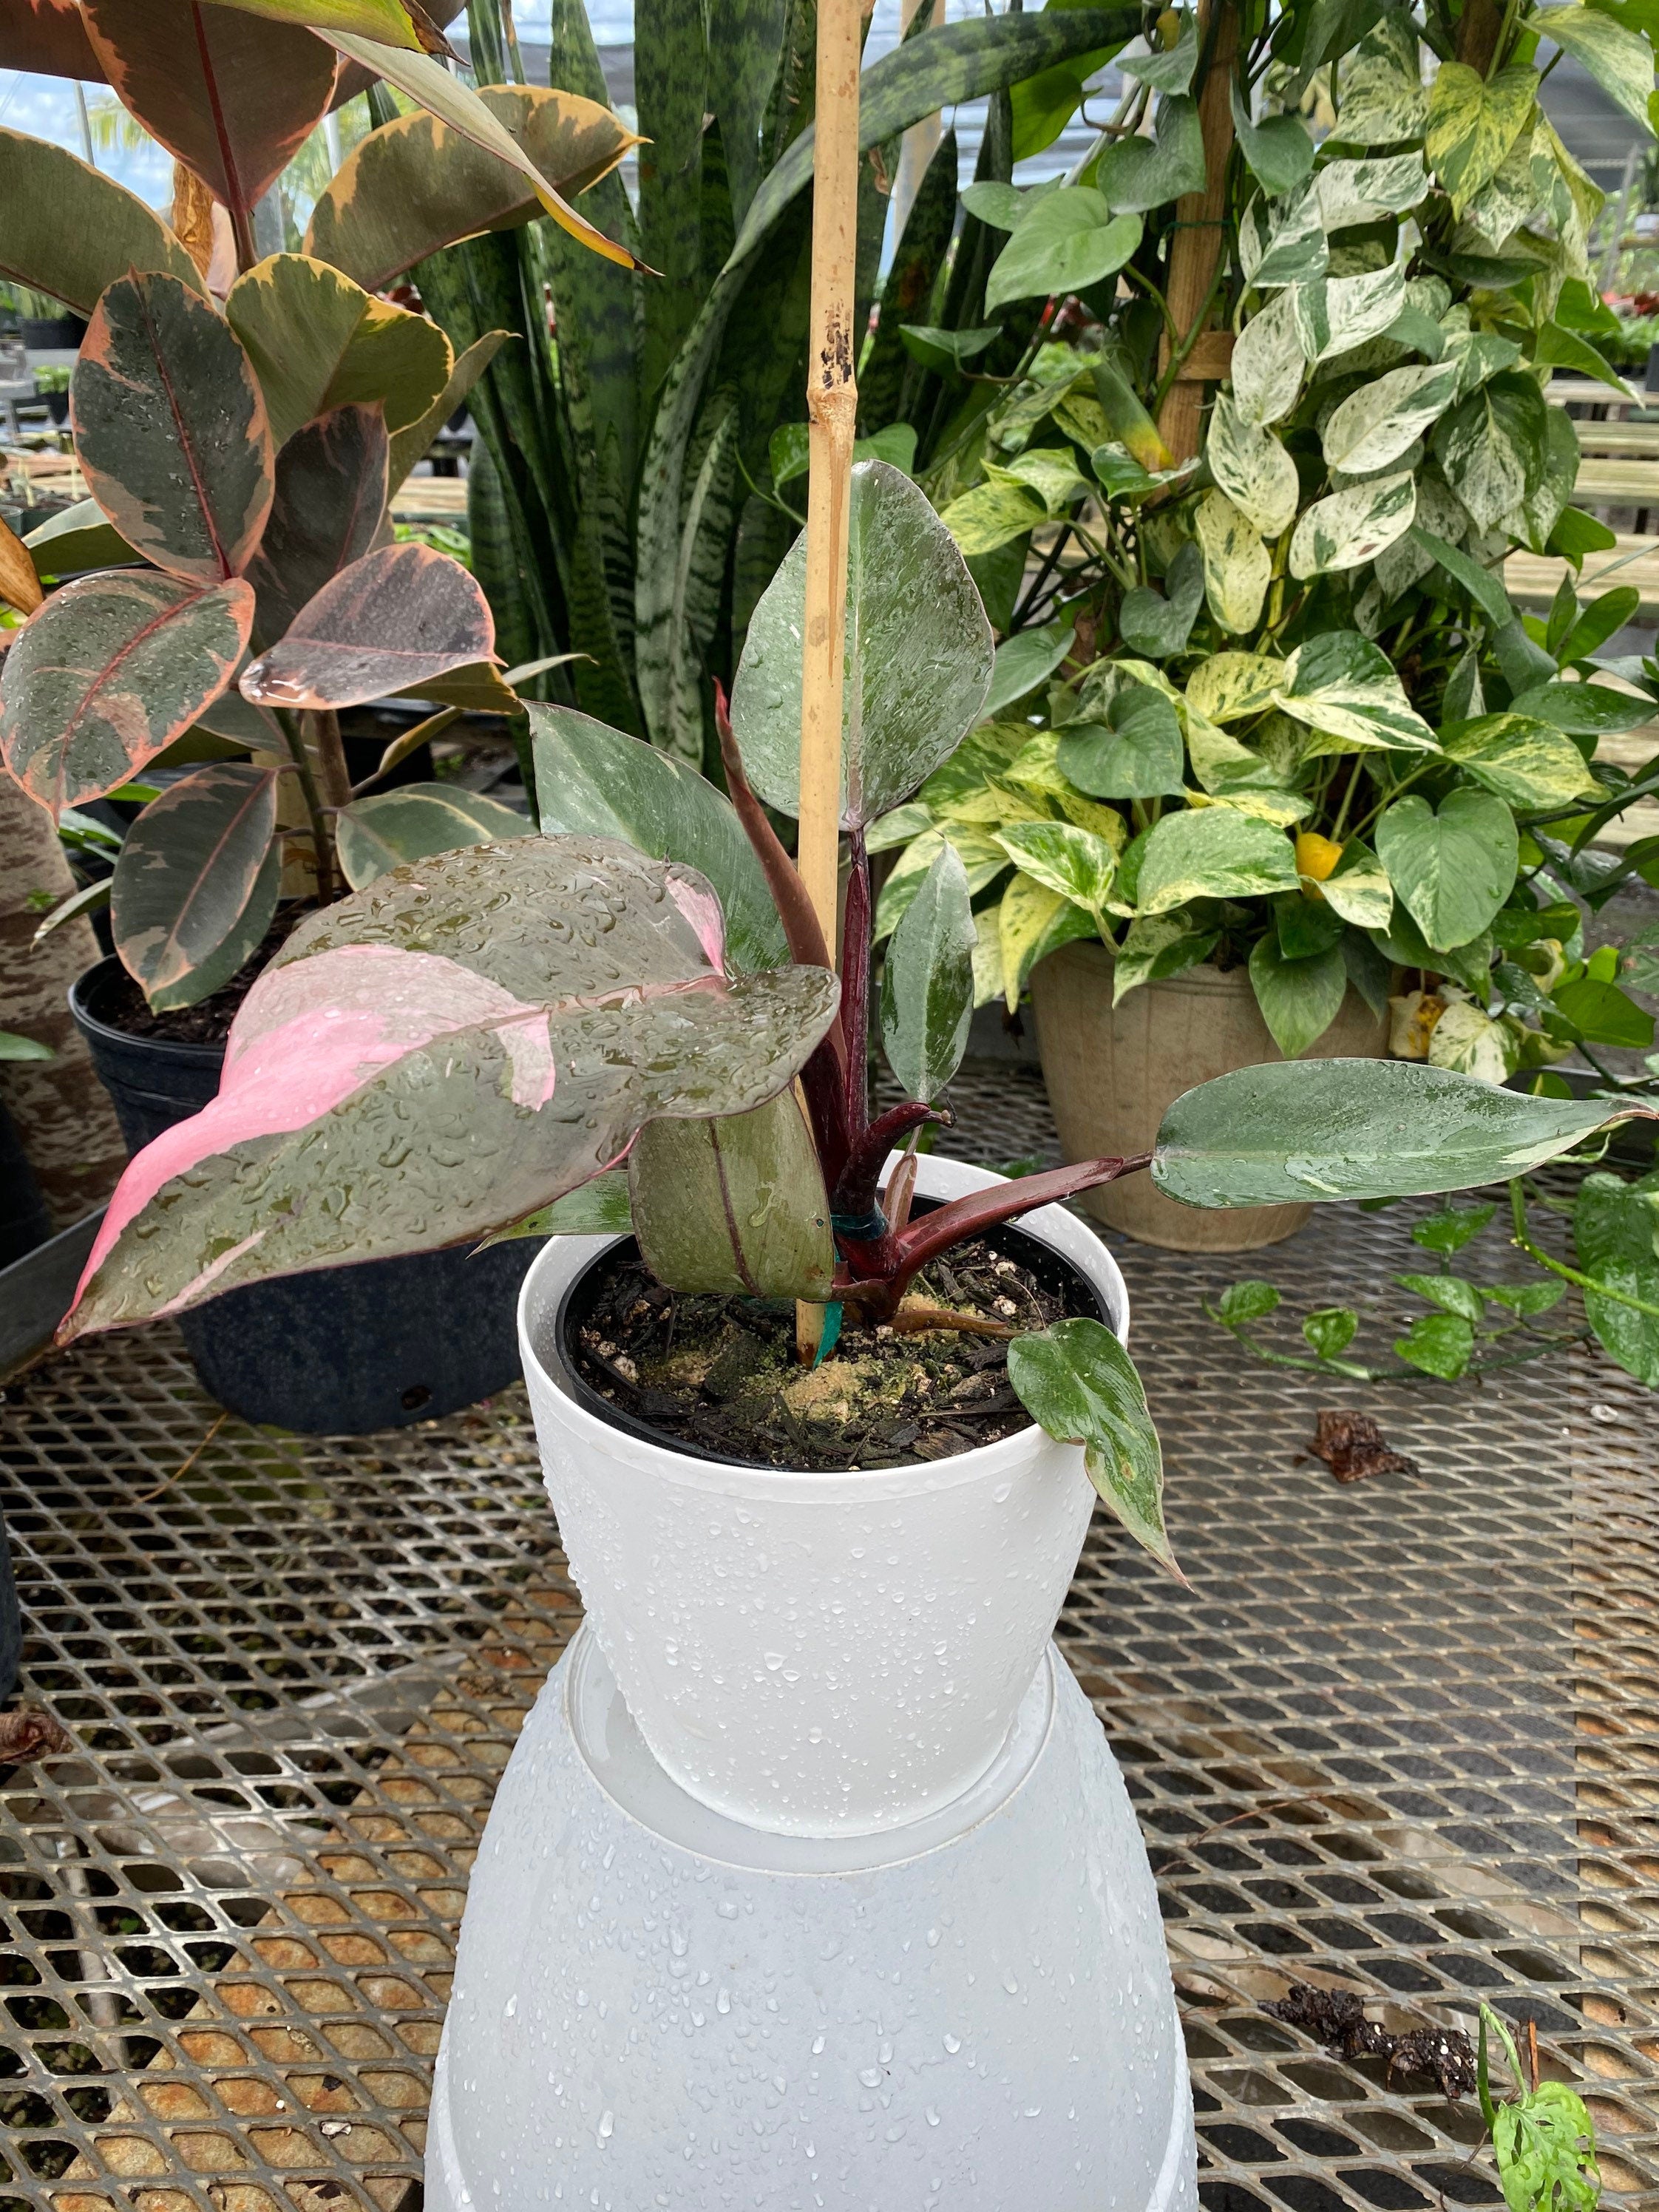 Philodendron Pink Princess in Trellis, Philodendron Erubescens Exotic Plants in pot